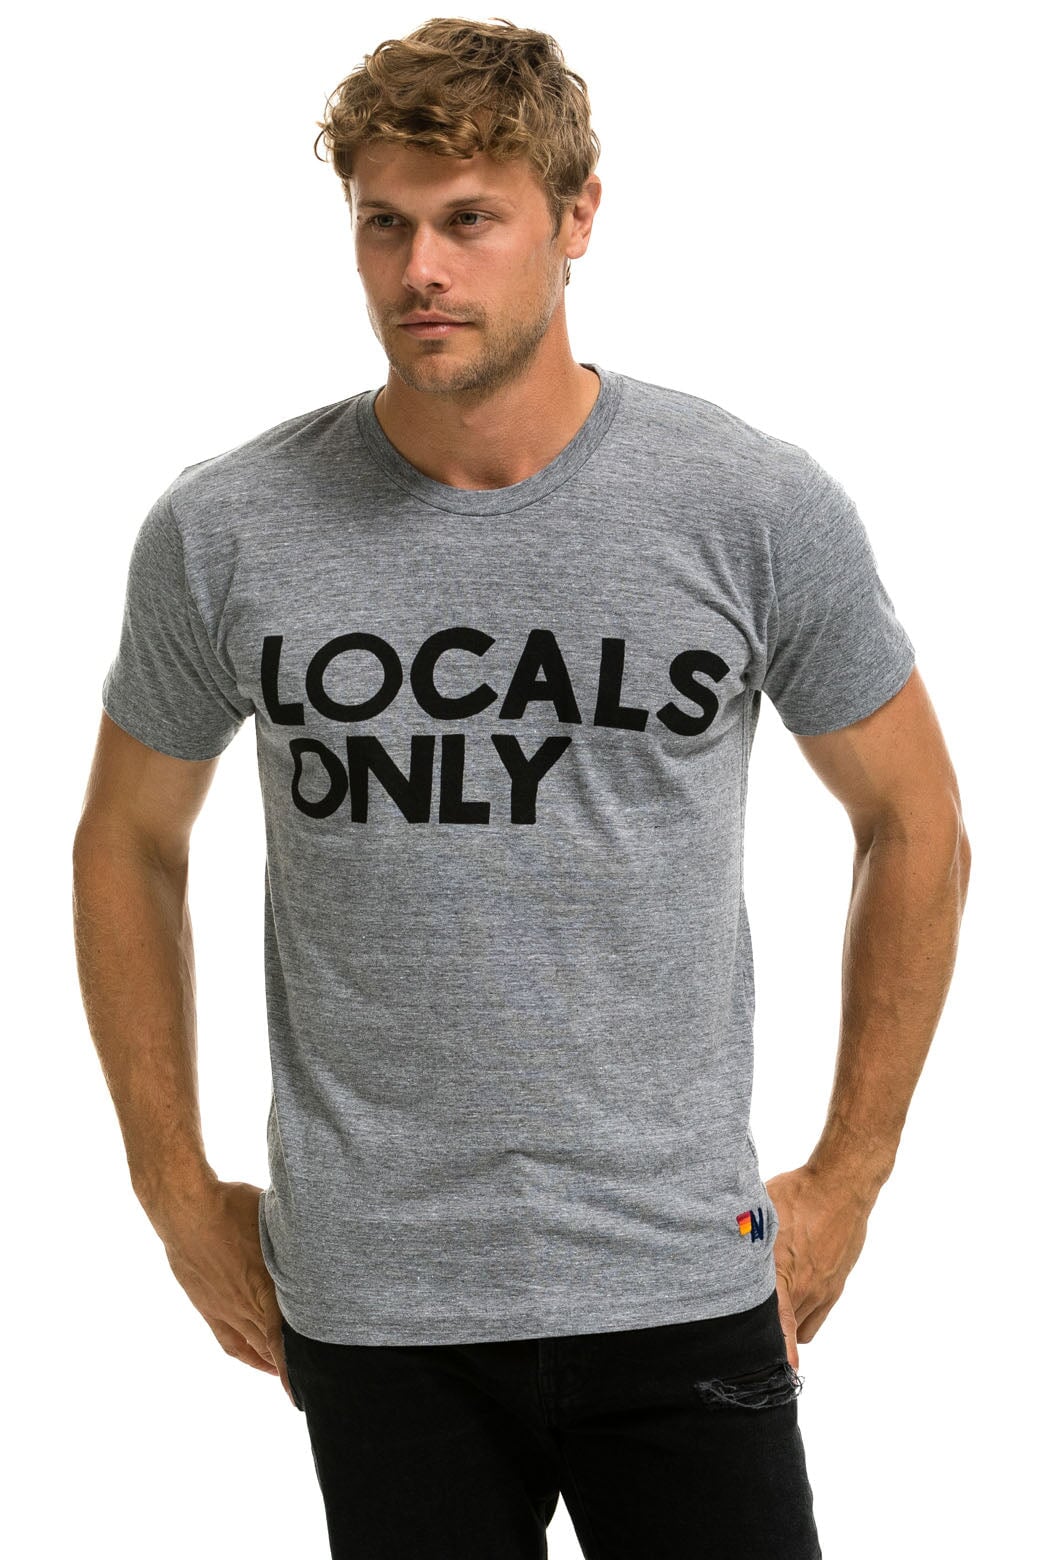 LOCALS ONLY TEE - HEATHER GREY Tees Aviator Nation 